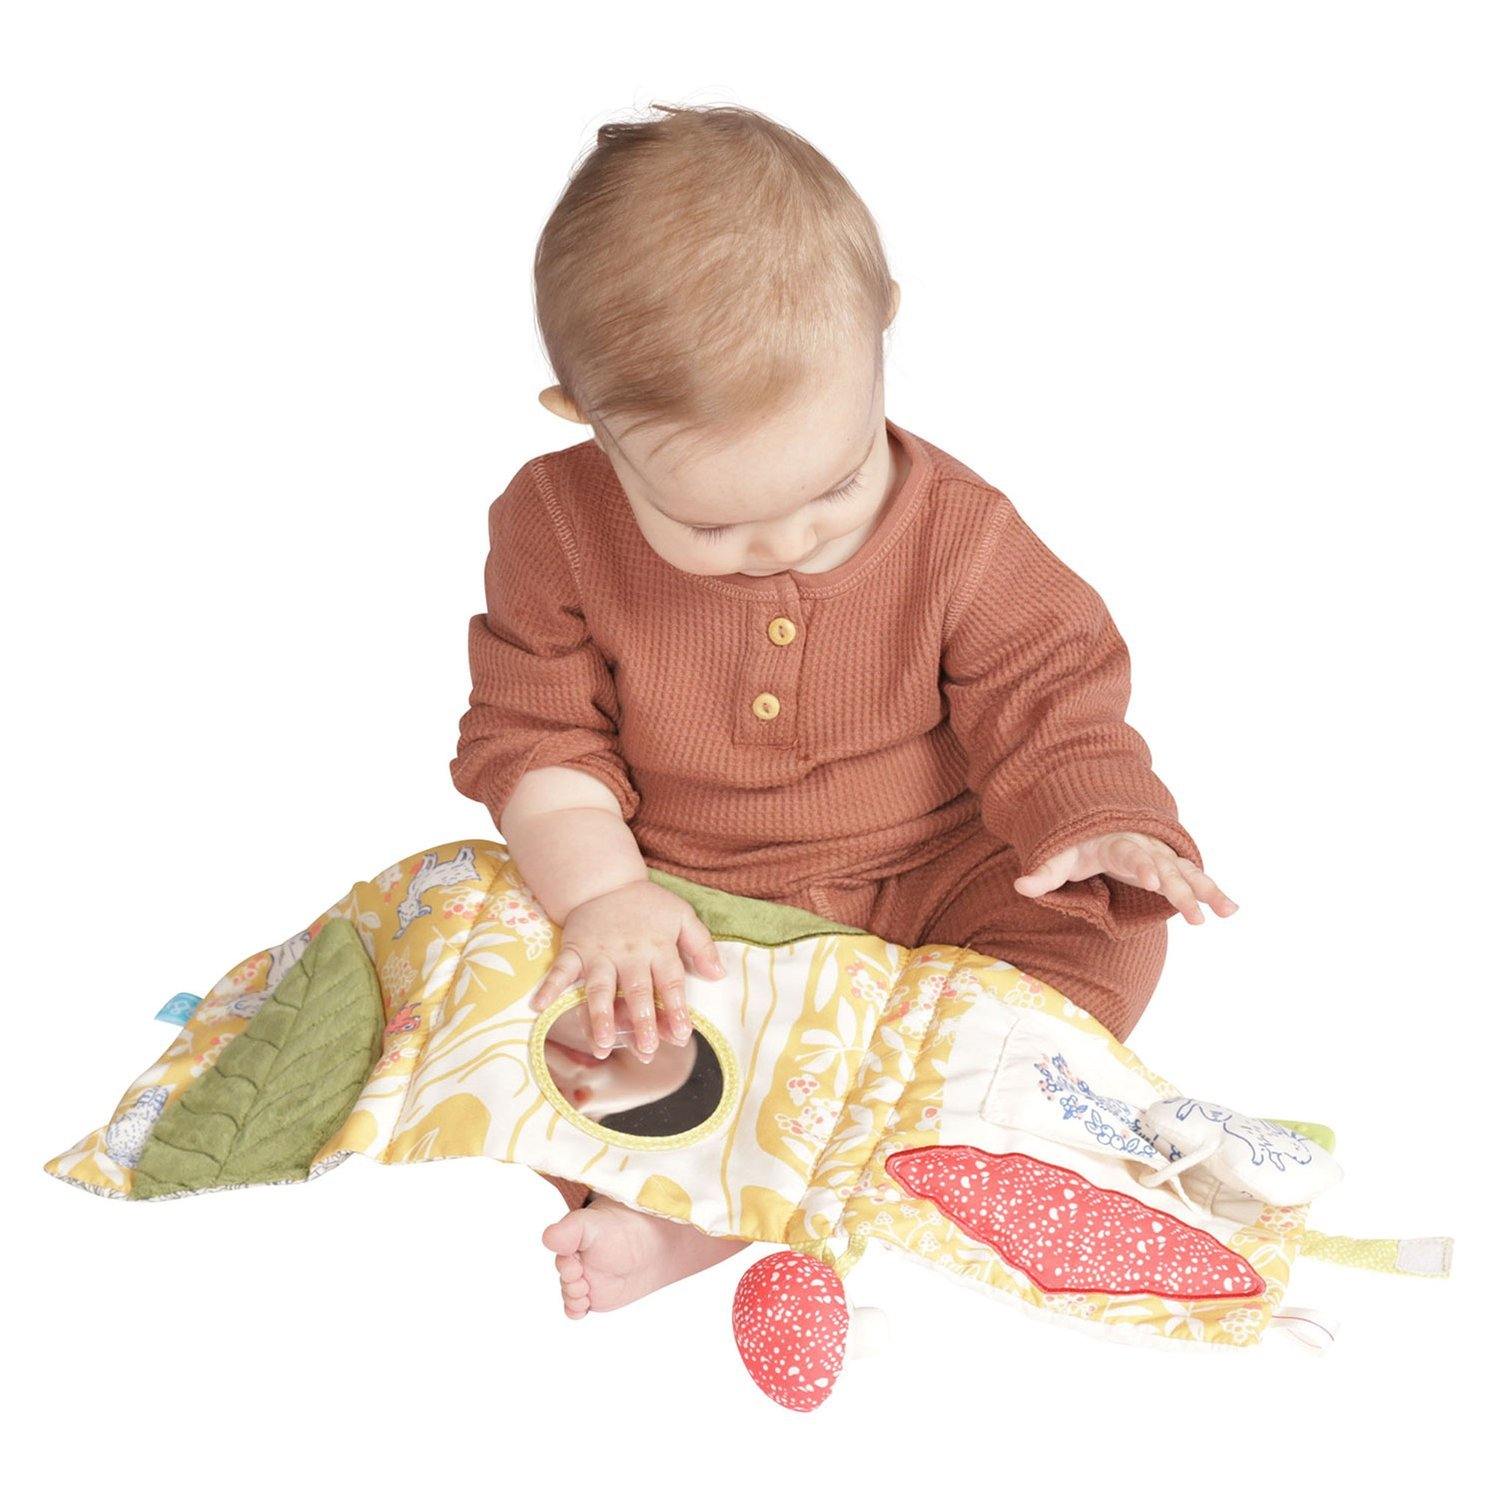 Baby playing with Manhattan Toy Company Deer One Soft Book